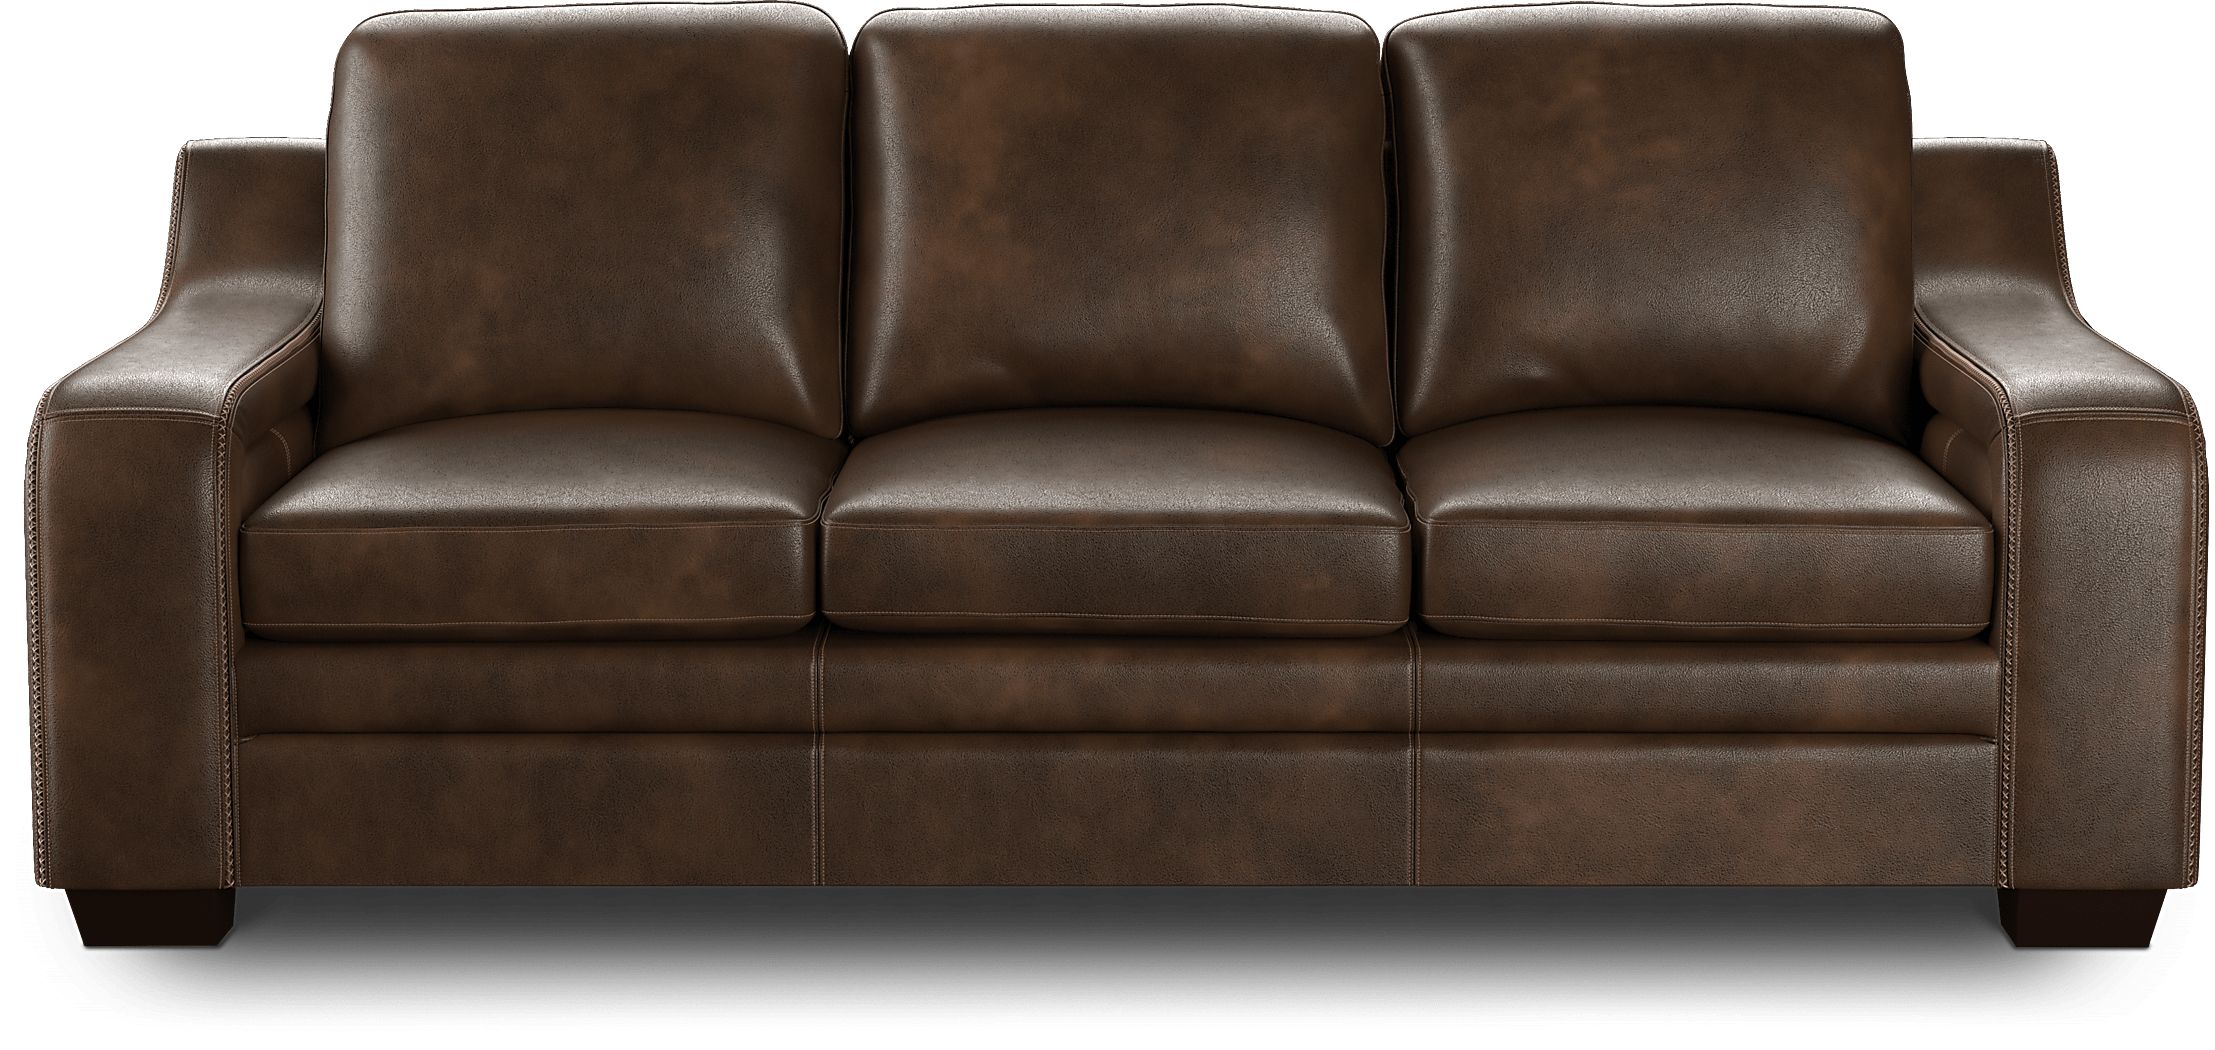 Gisella Brown Leather 3 Pc Living Room